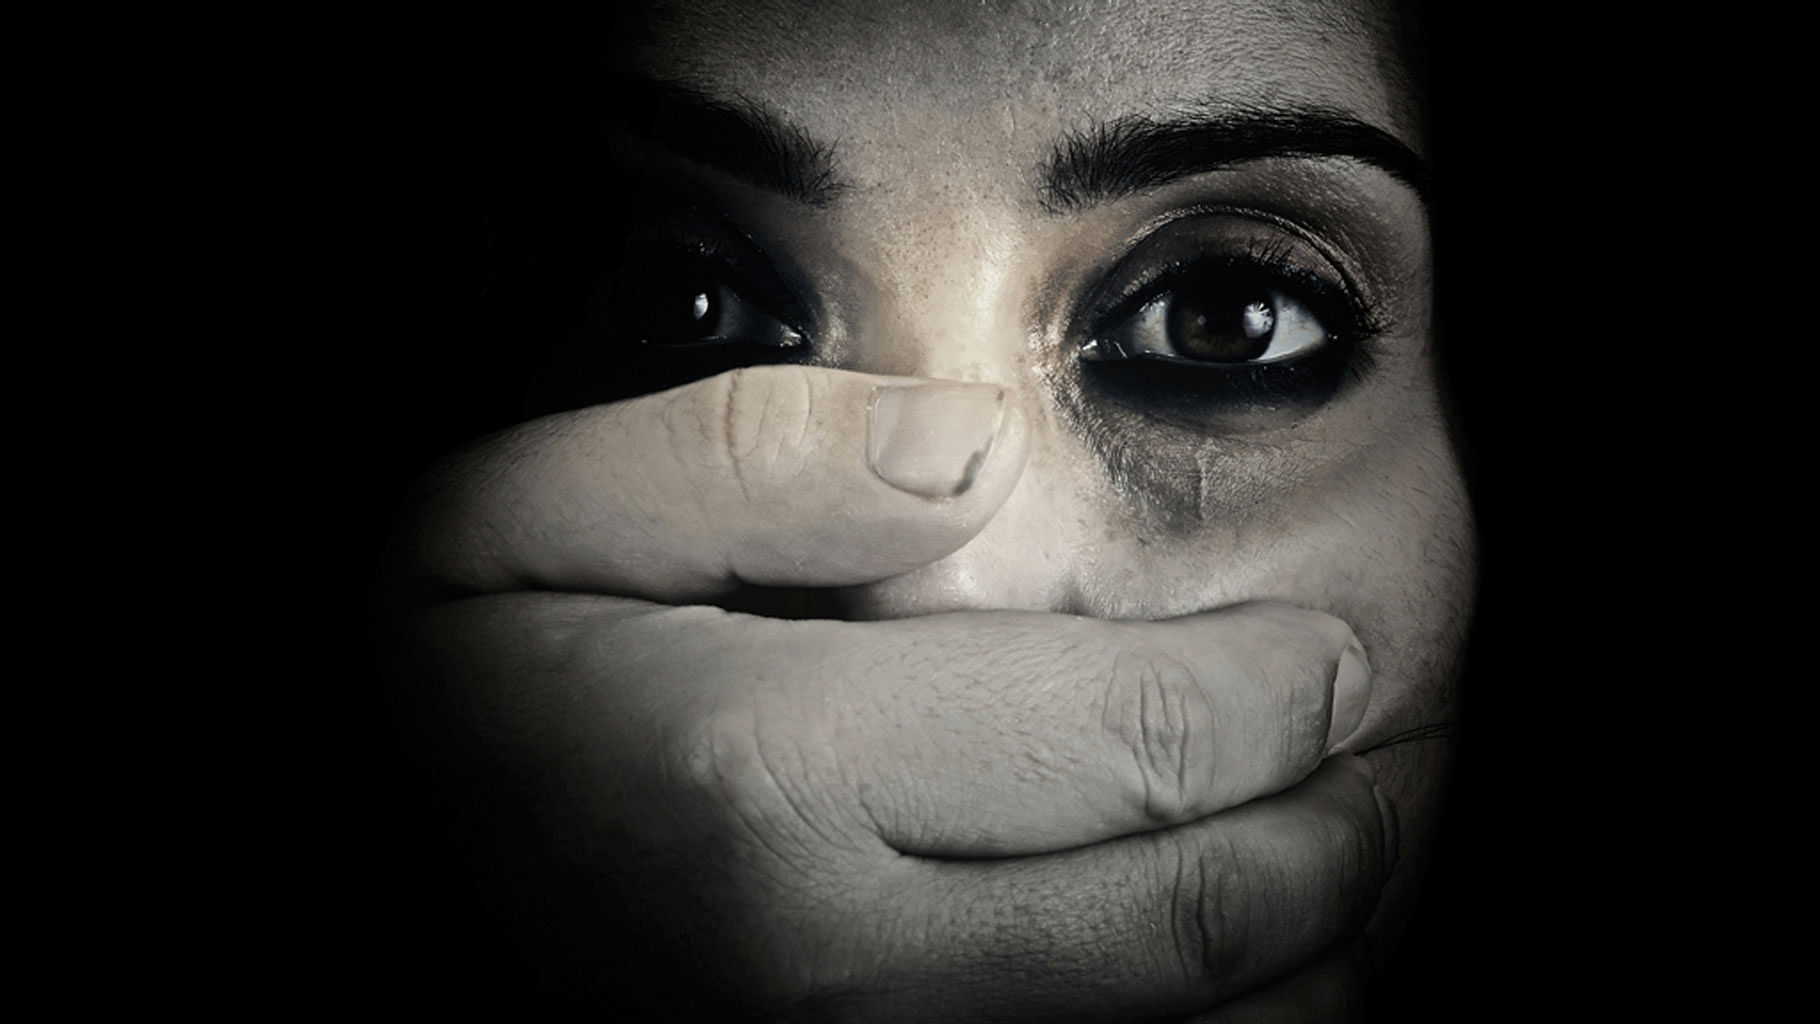 An 11-year-old girl was gangraped and strangled to death. (Photo: iStockphoto)